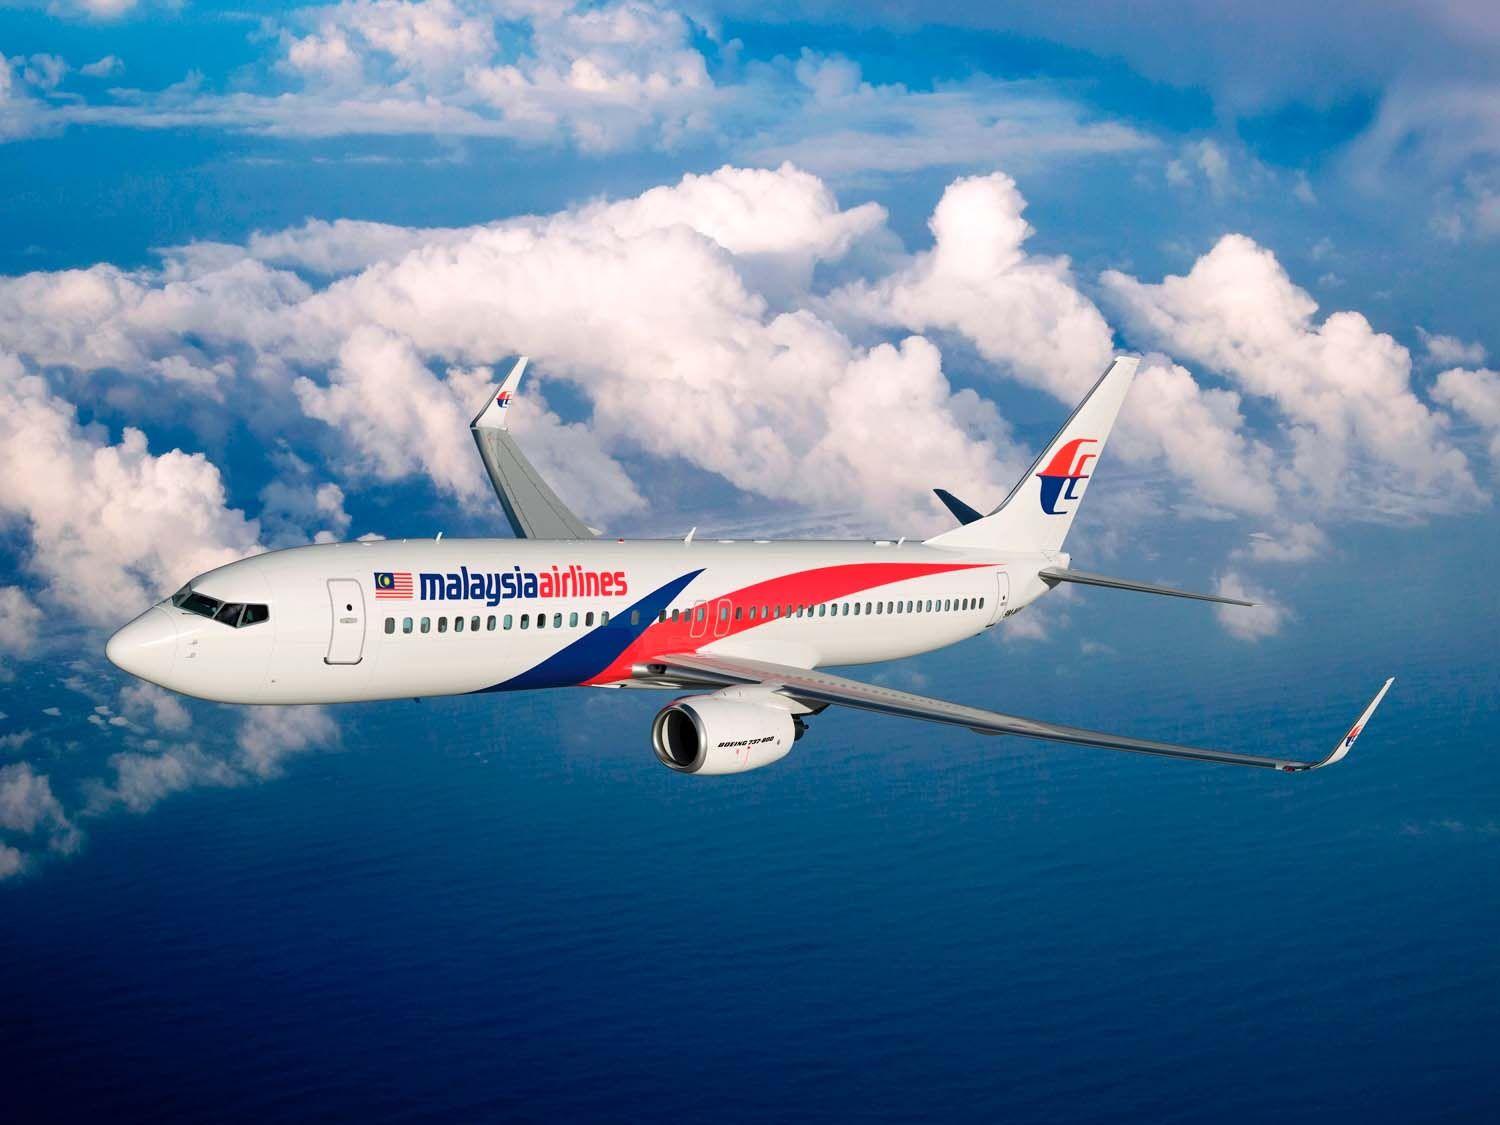 Malaysia Airlines HD Wallpaper